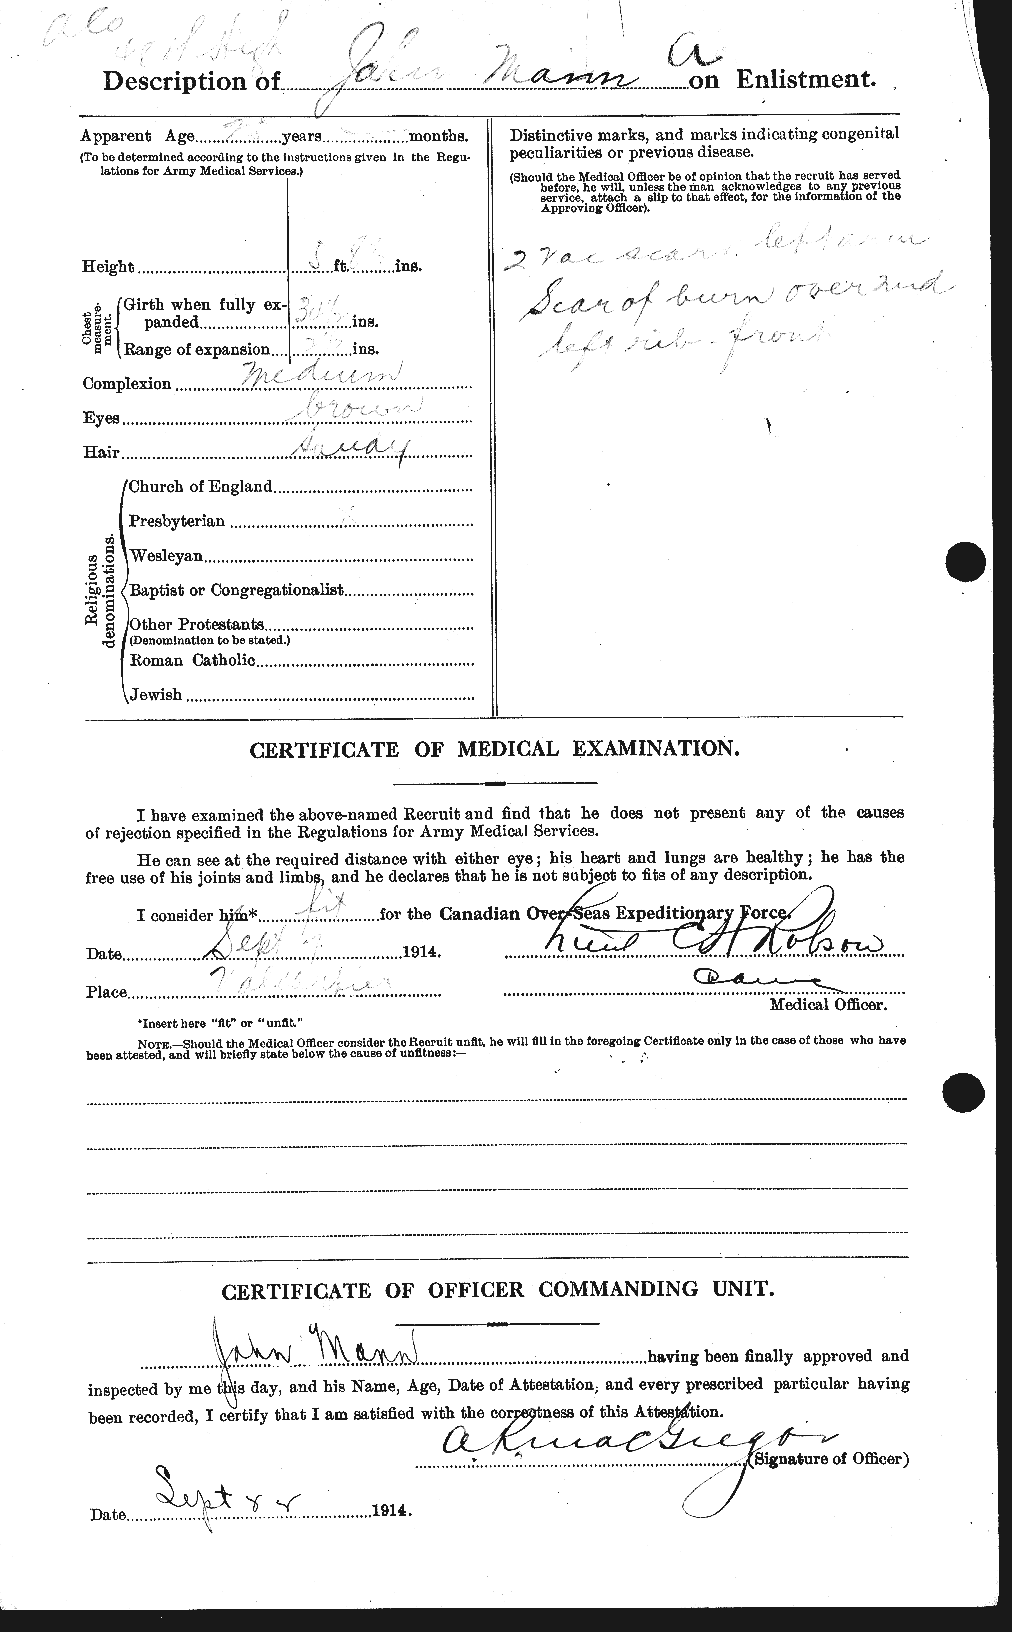 Personnel Records of the First World War - CEF 477230b